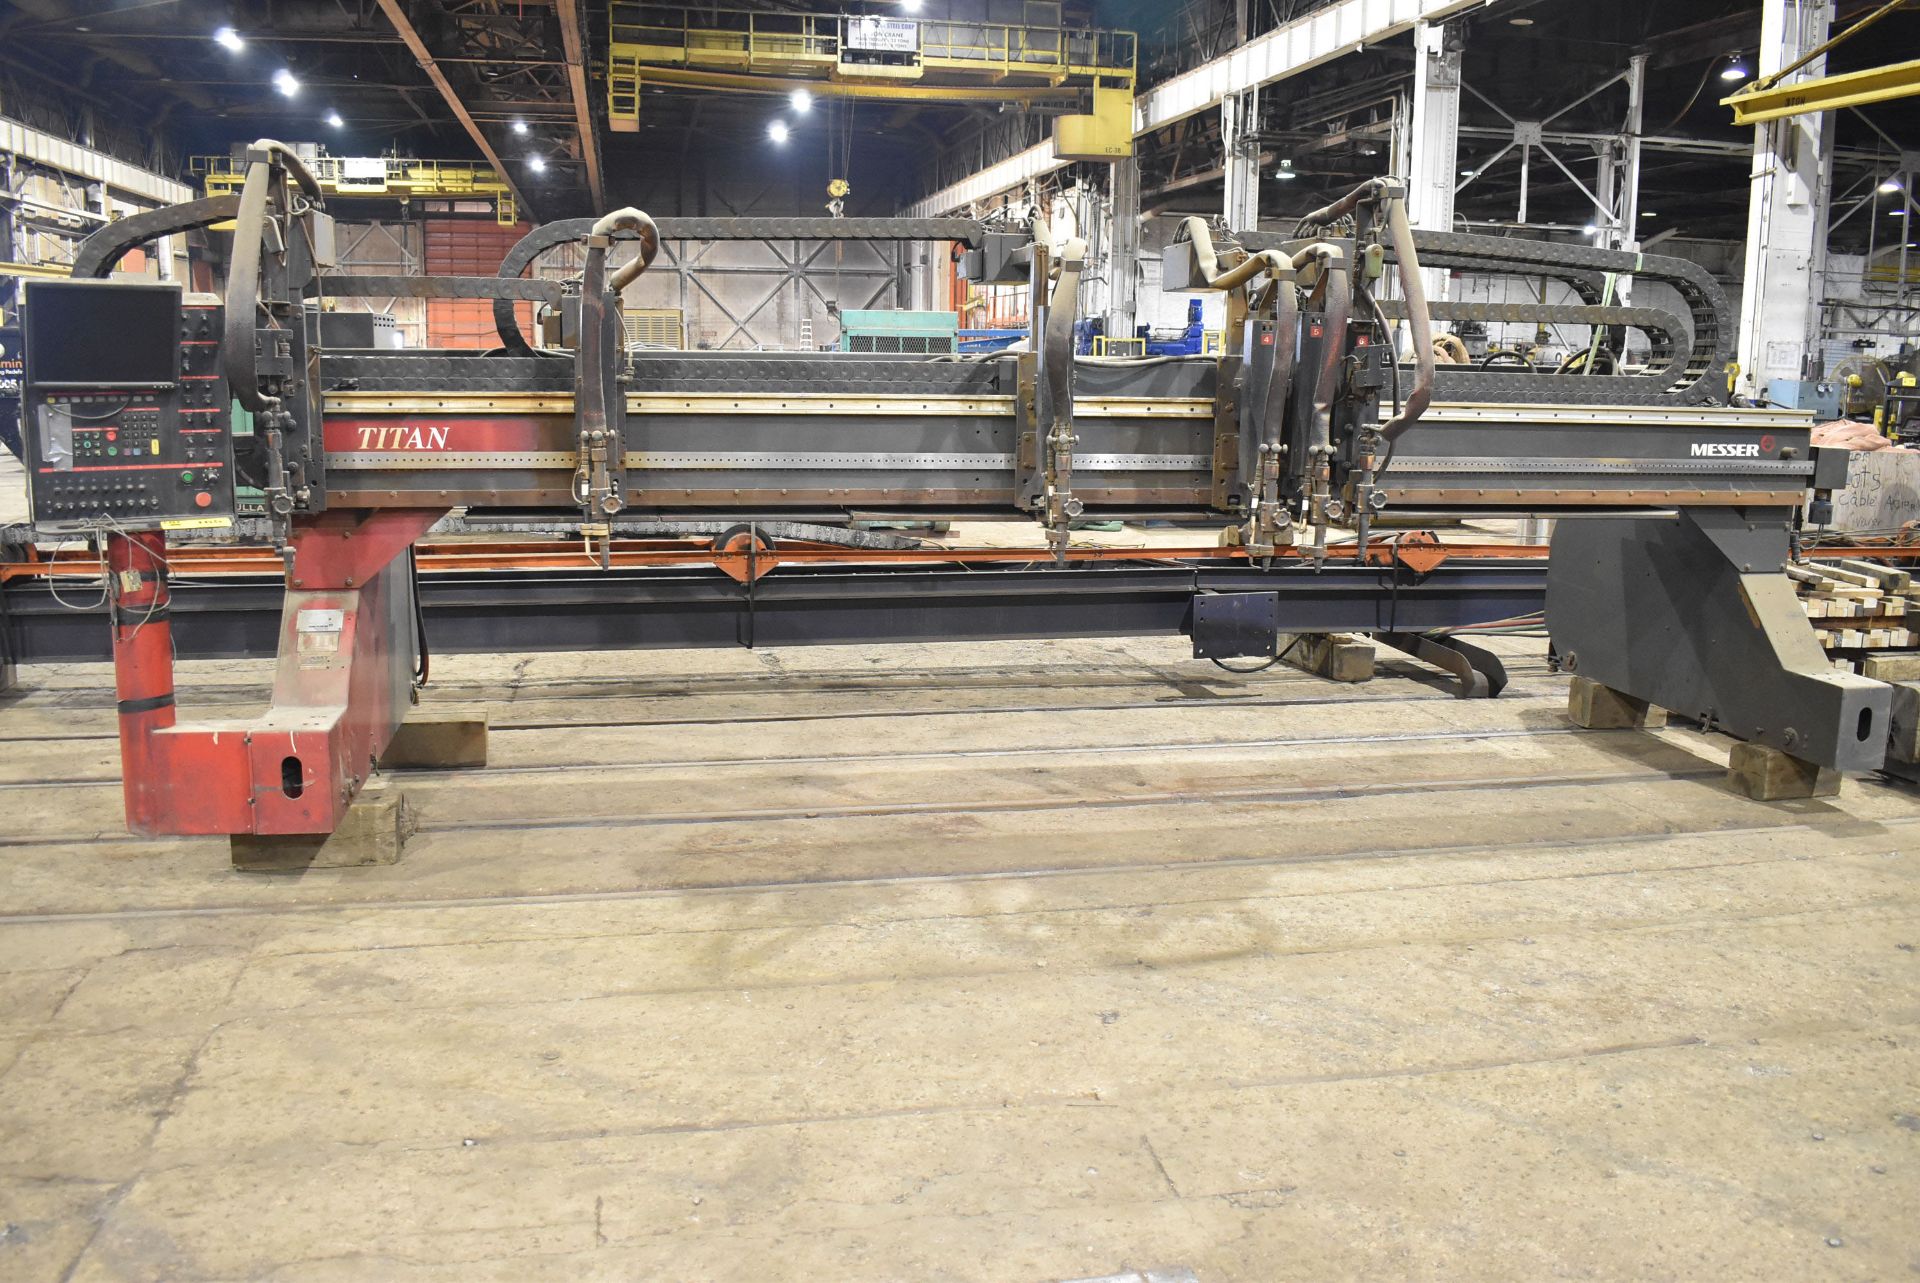 MESSER TITAN CNC OXY-FUEL BURNING TABLE GANTRY WITH MESSER NAVIGATOR CNC CONTROL, 196" BETWEEN